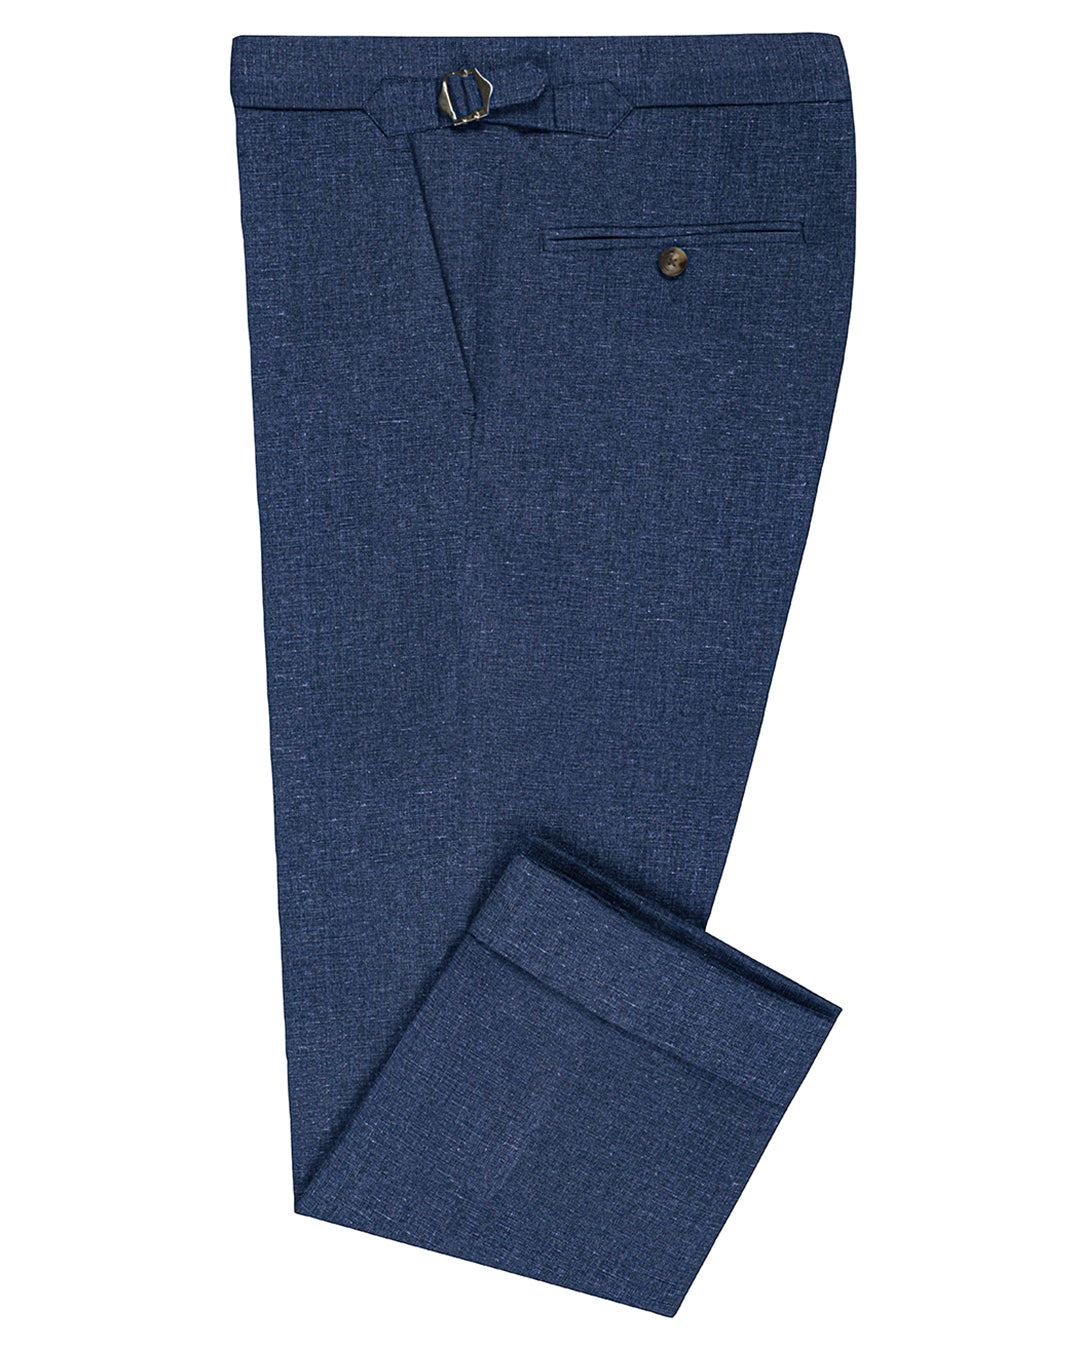 Side view of custom linen pants for men by Luxire in indigo washed